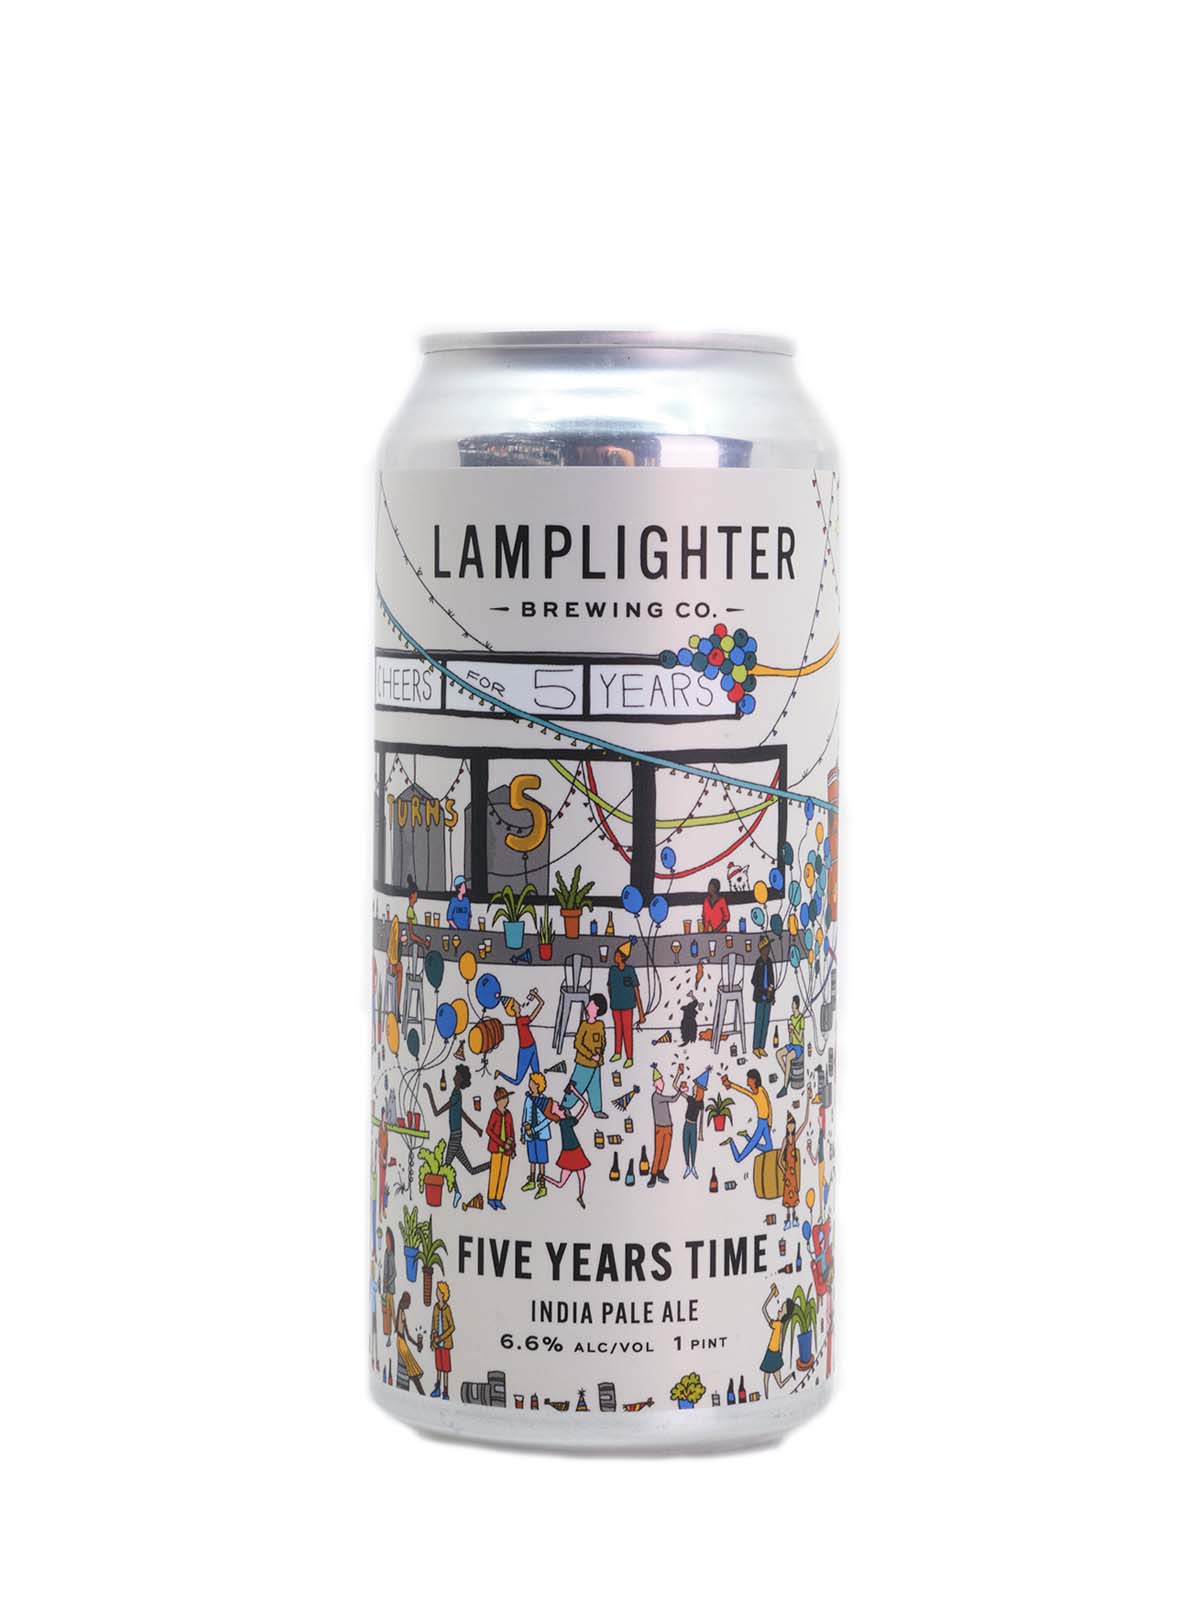 Lamplighter Brewing Co "Five Years Time" DDH IPA (Cambridge, MA)